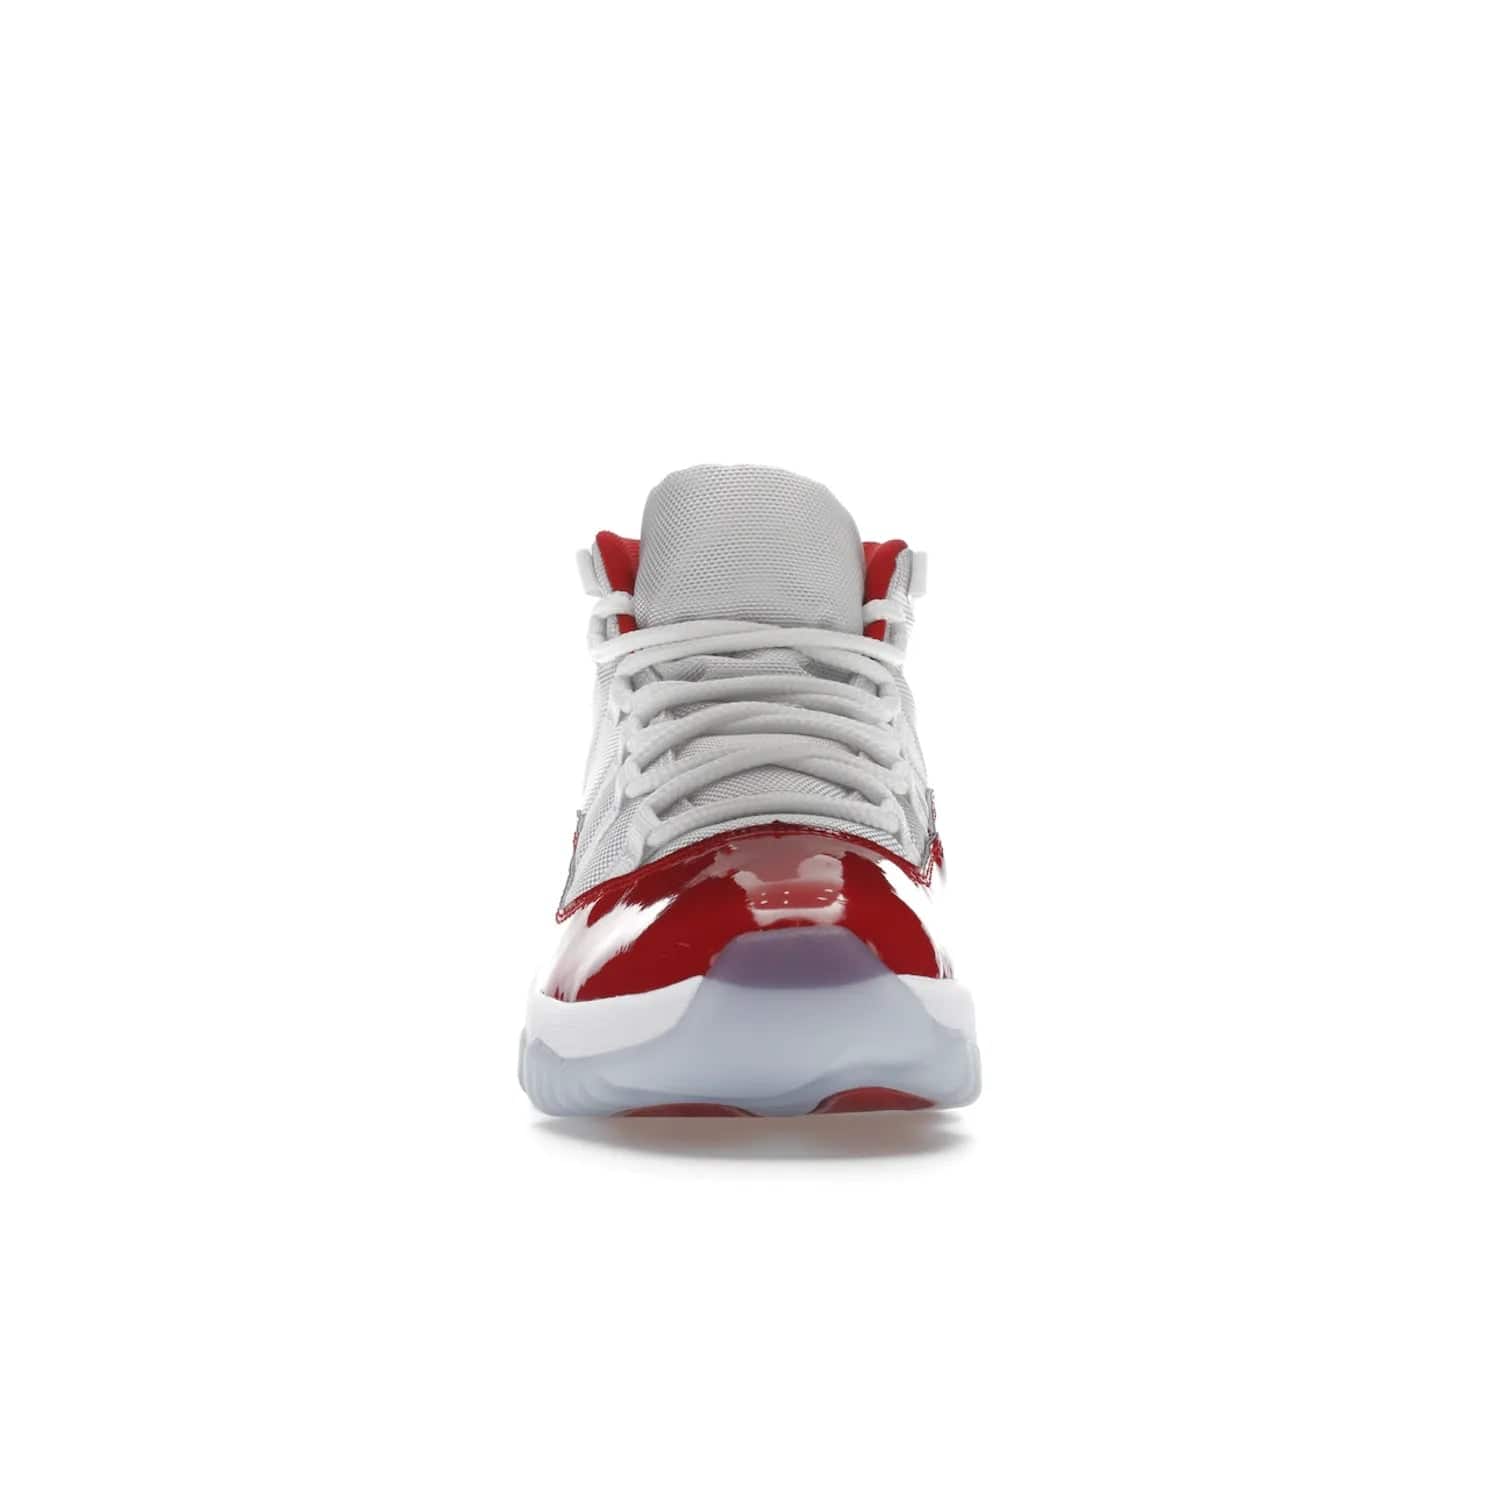 Jordan 11 Retro Cherry (2022) - Image 10 - Only at www.BallersClubKickz.com - The Air Jordan 11 Cherry features classic patent leather with Cherry red accents, icy blue outsole, and debossed 23 on the heel tab. Refresh your sneaker game with this iconic update, available December 10, 2022.